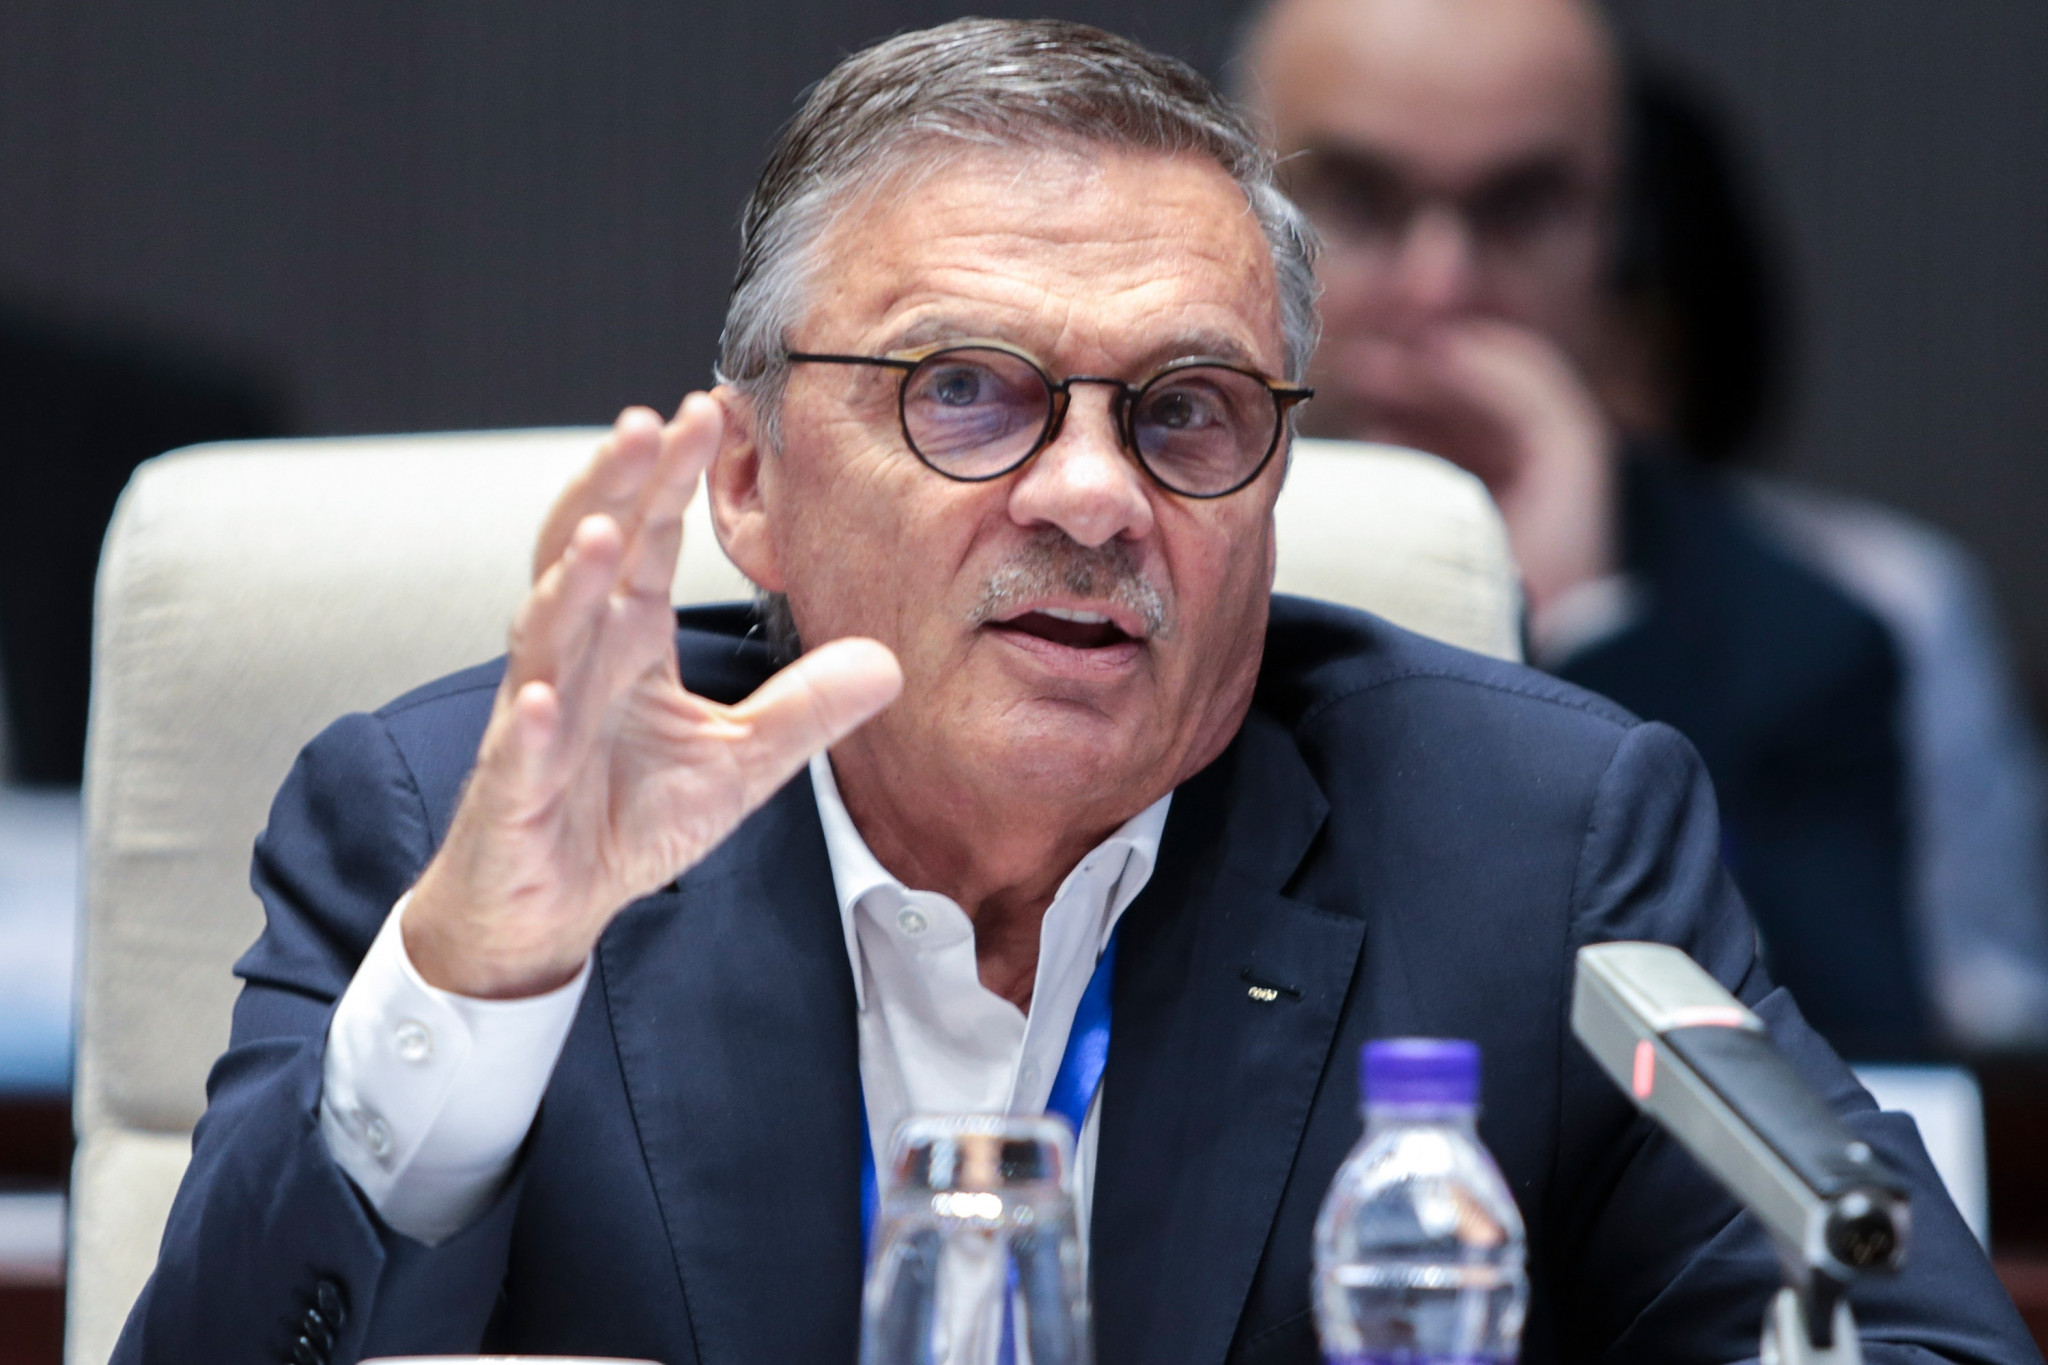 IIHF President Rene Fasel has said plans for the World Championship remain unchanged ©Getty Images